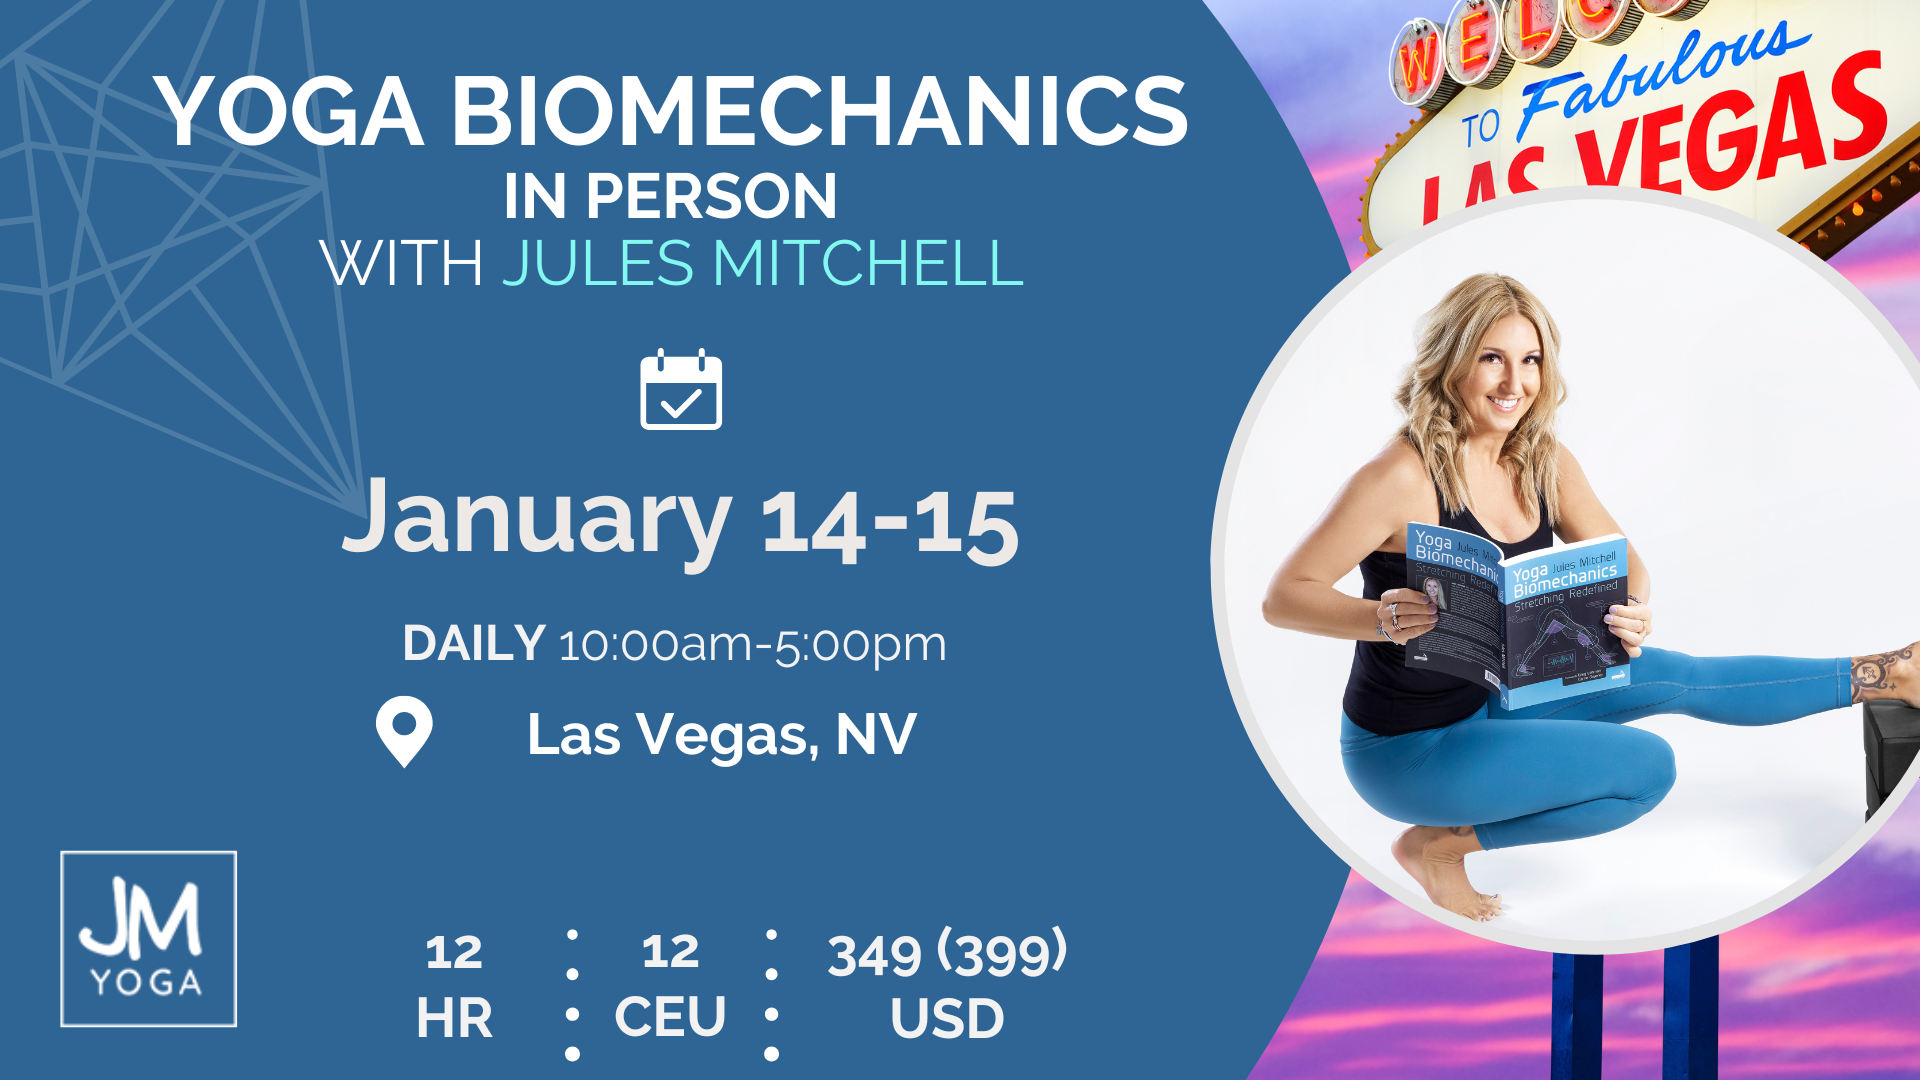 Promo graphic for Jules teaching an in-person yoga biomechanics course in las vegas